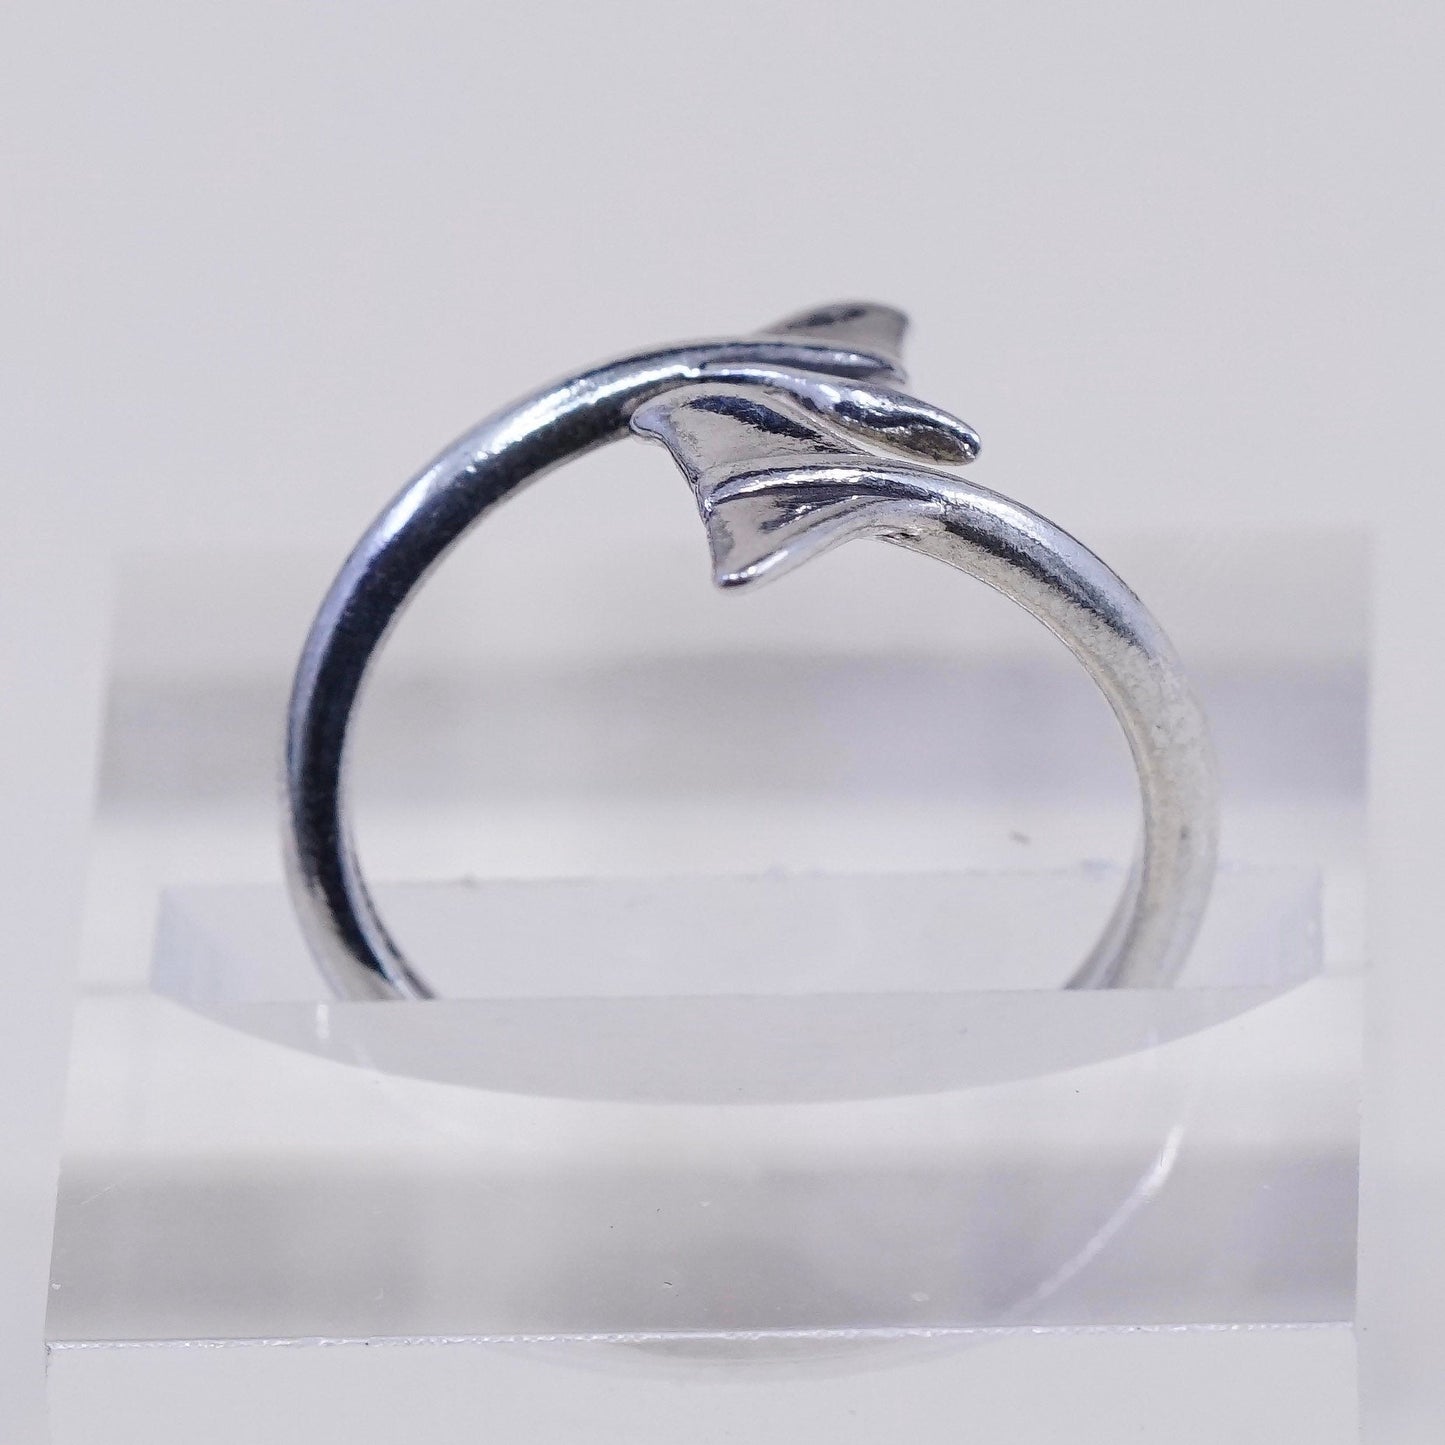 Size 7.5, WJ sterling silver handmade statement ring, 925 whale tail wrap band